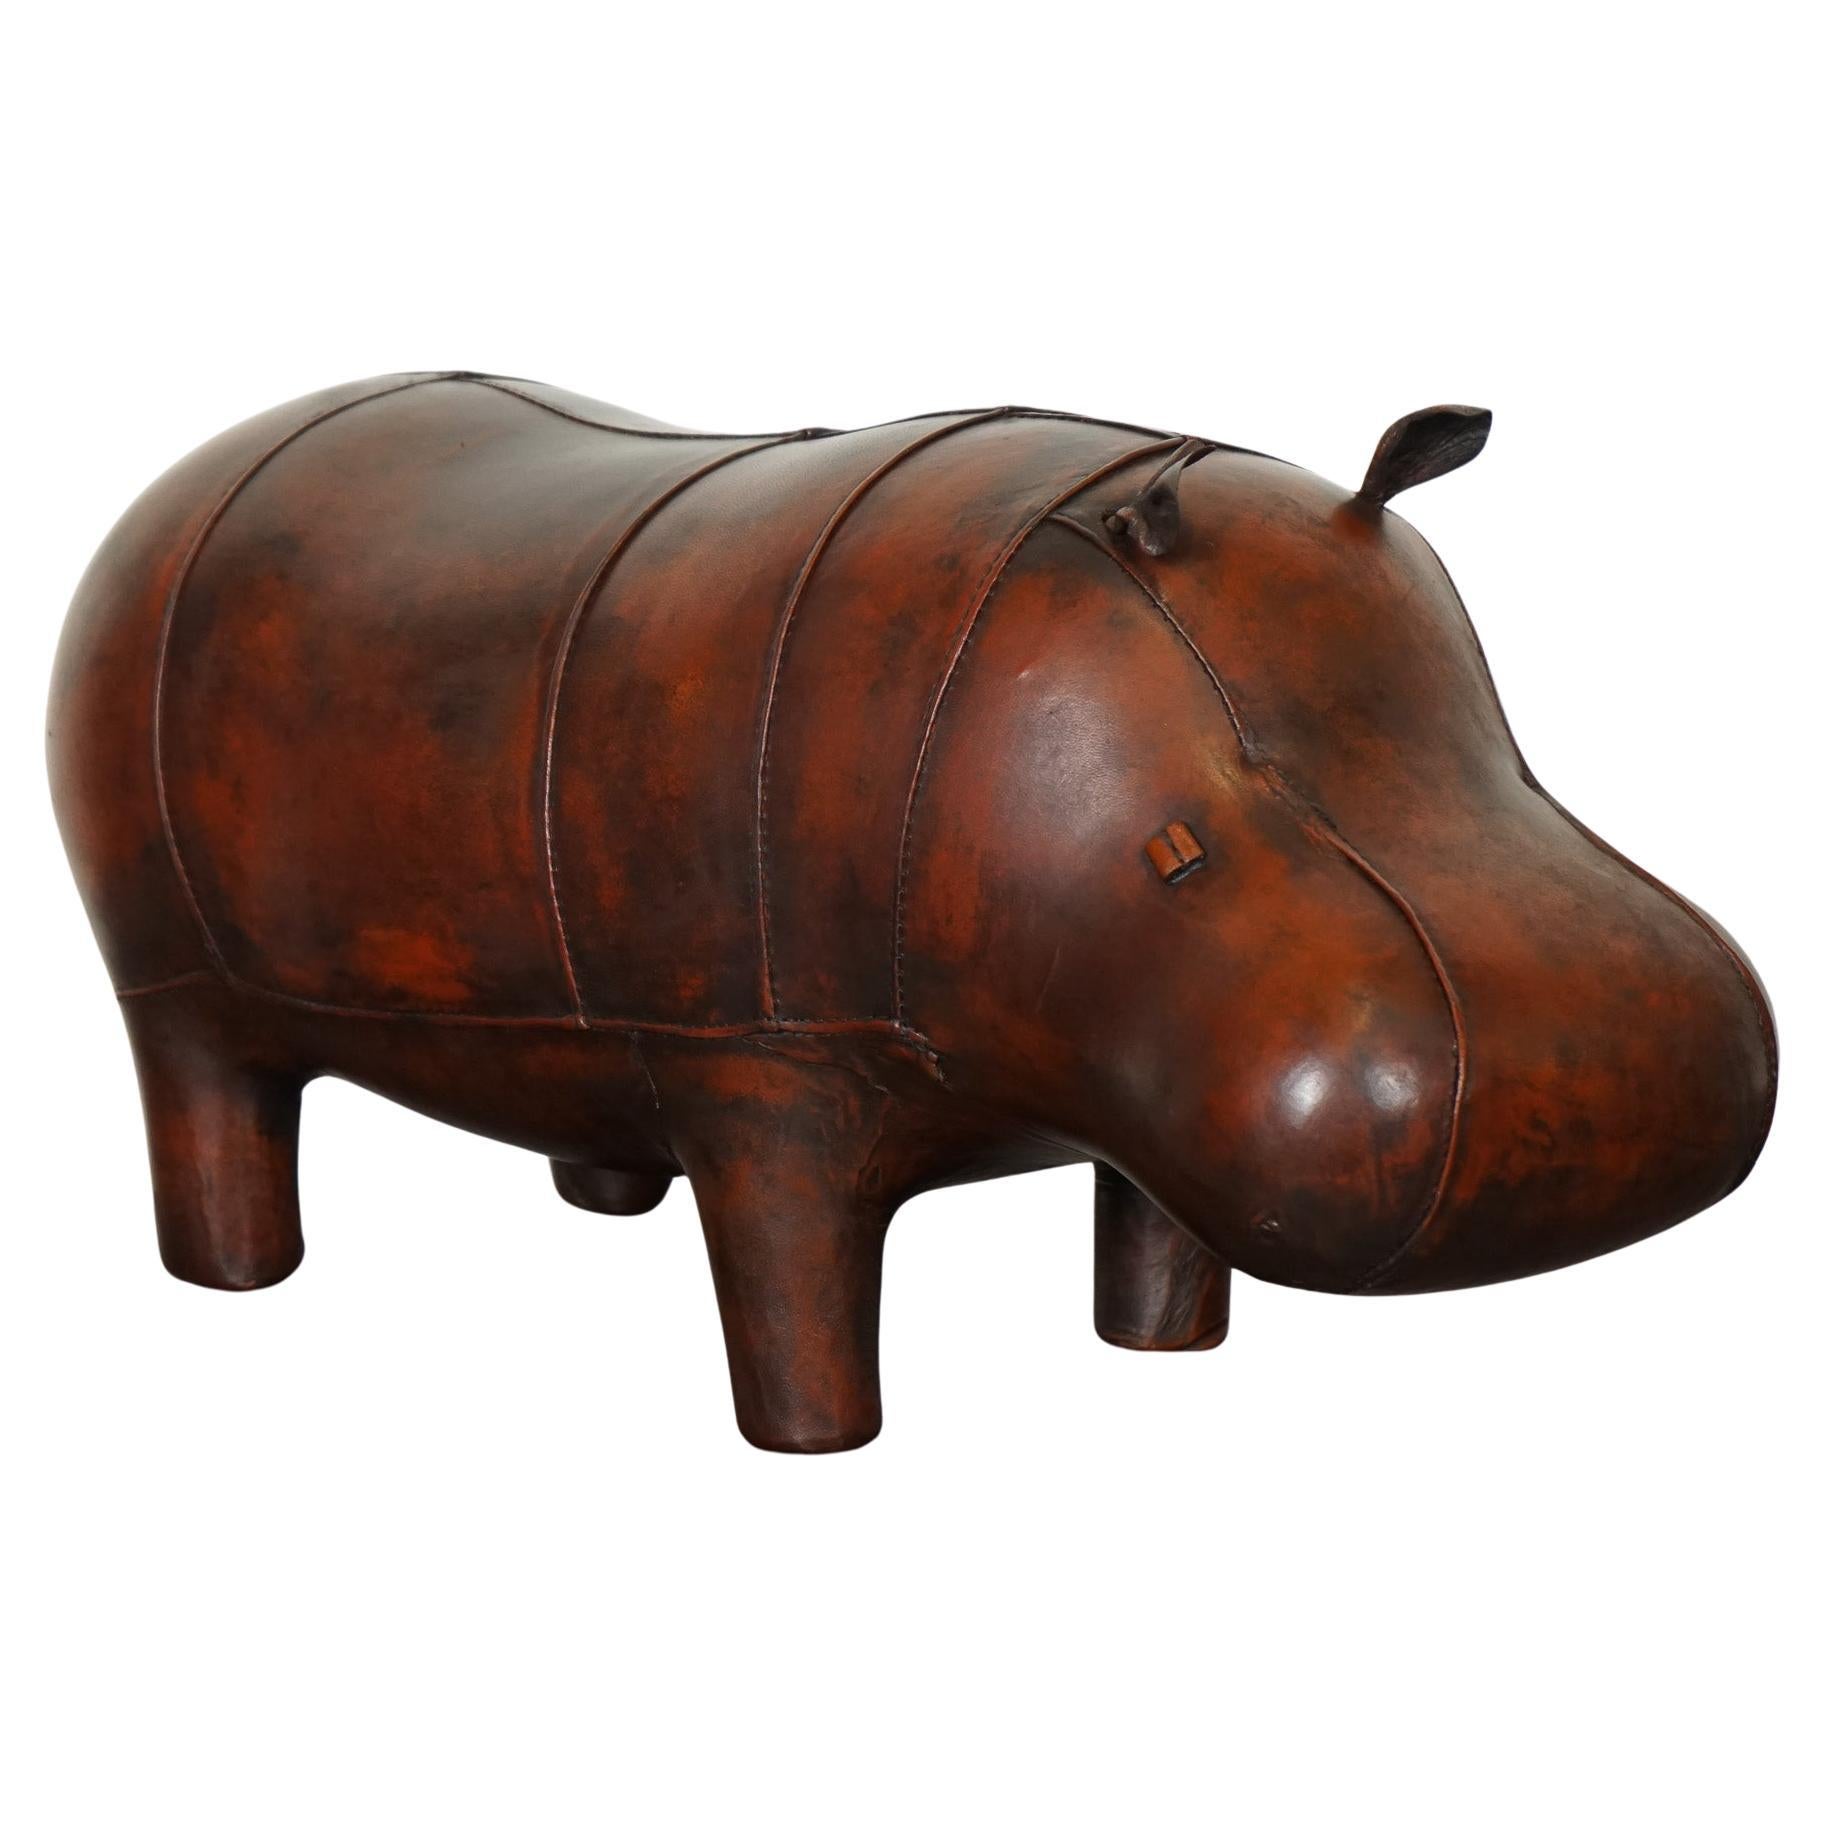 LIBERTY LONDON STYLE OMERSA ANTIQUE BROWN LEATHER FOOTSTOOL HiPPO For Sale